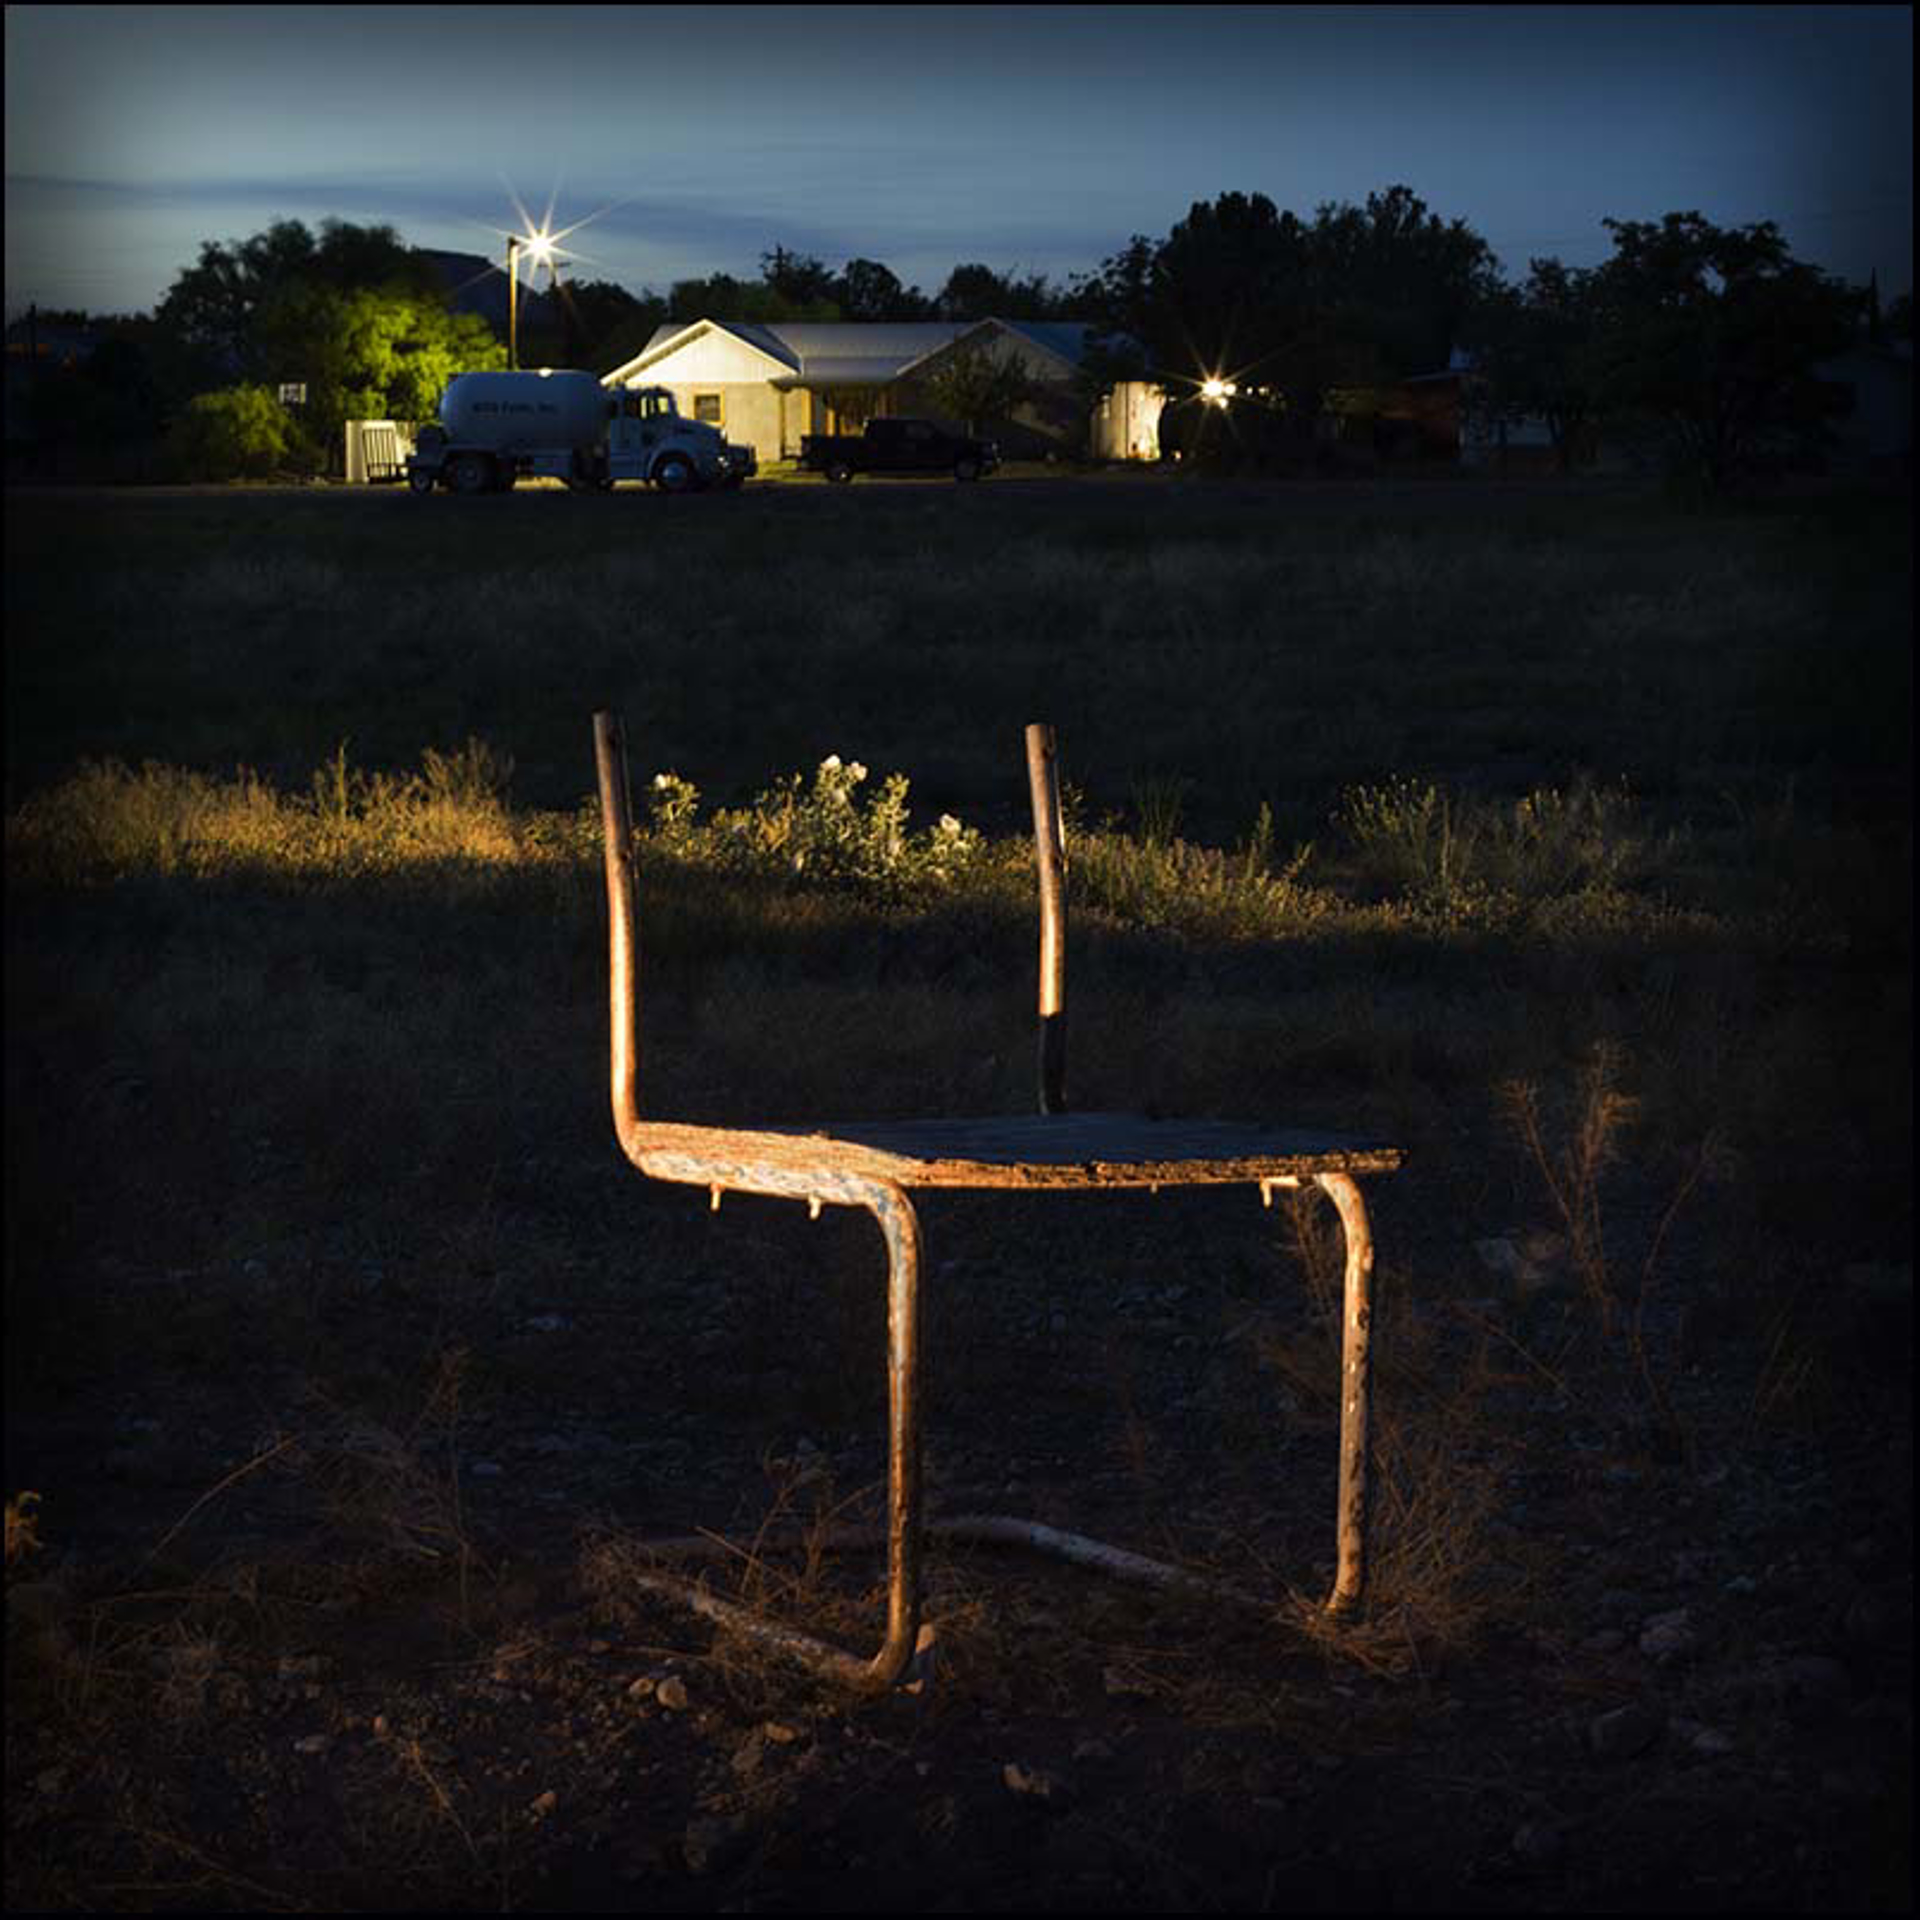 The Chair by James H. Evans